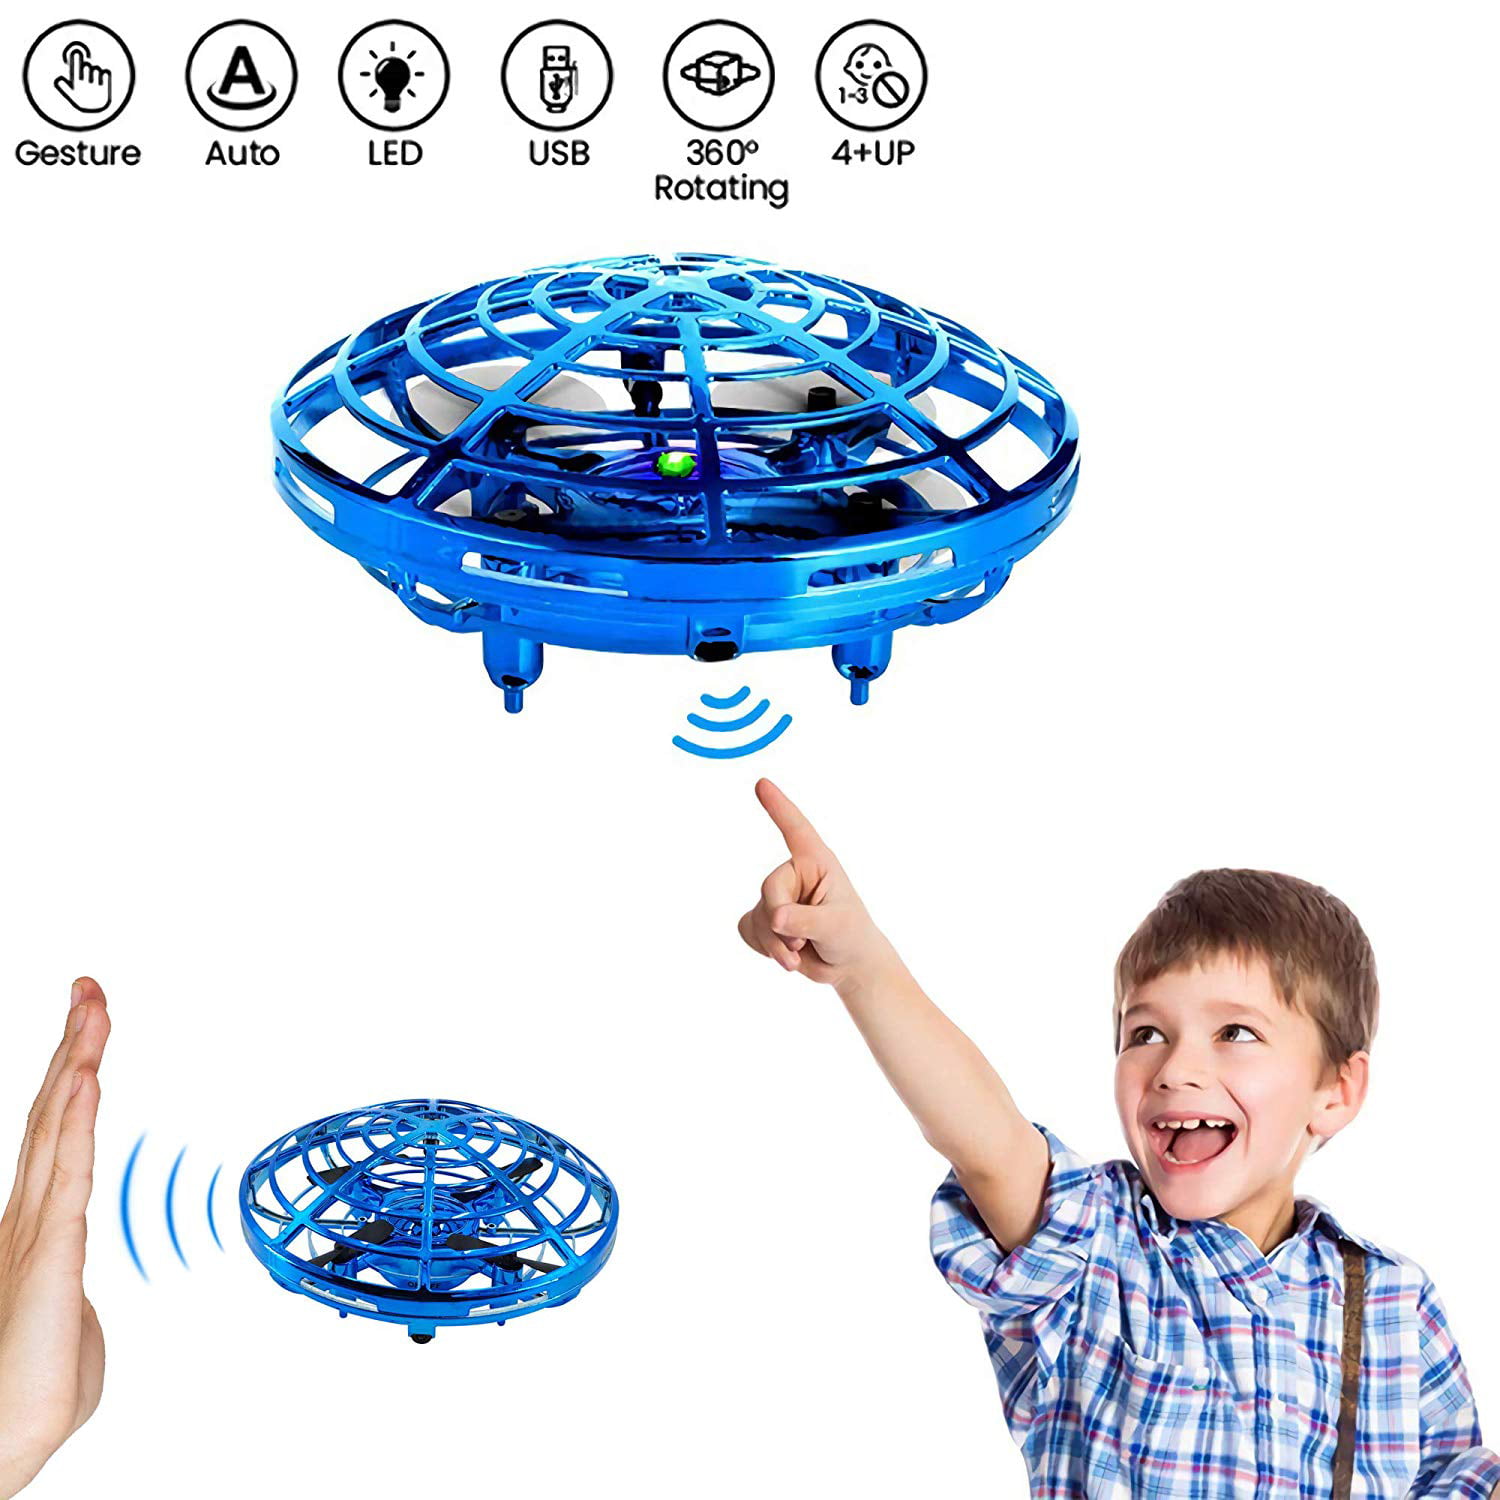 Toys Kids Gift Mini Drone Quad Induction Levitation Hand Operated UFO Helicopter 